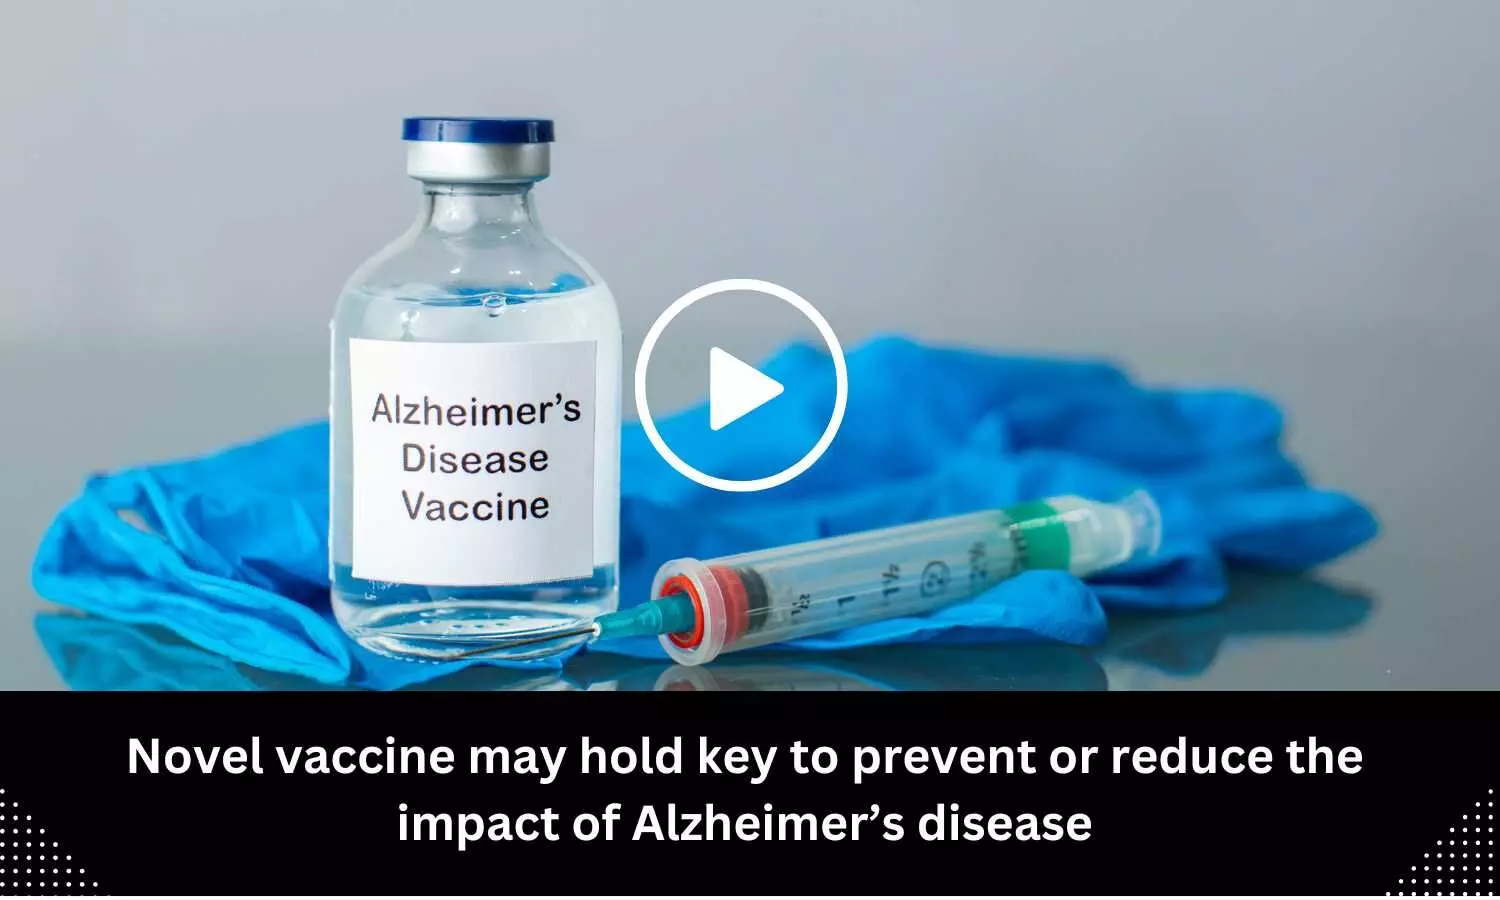 Novel vaccine may hold key to prevent or reduce the impact of Alzheimers disease